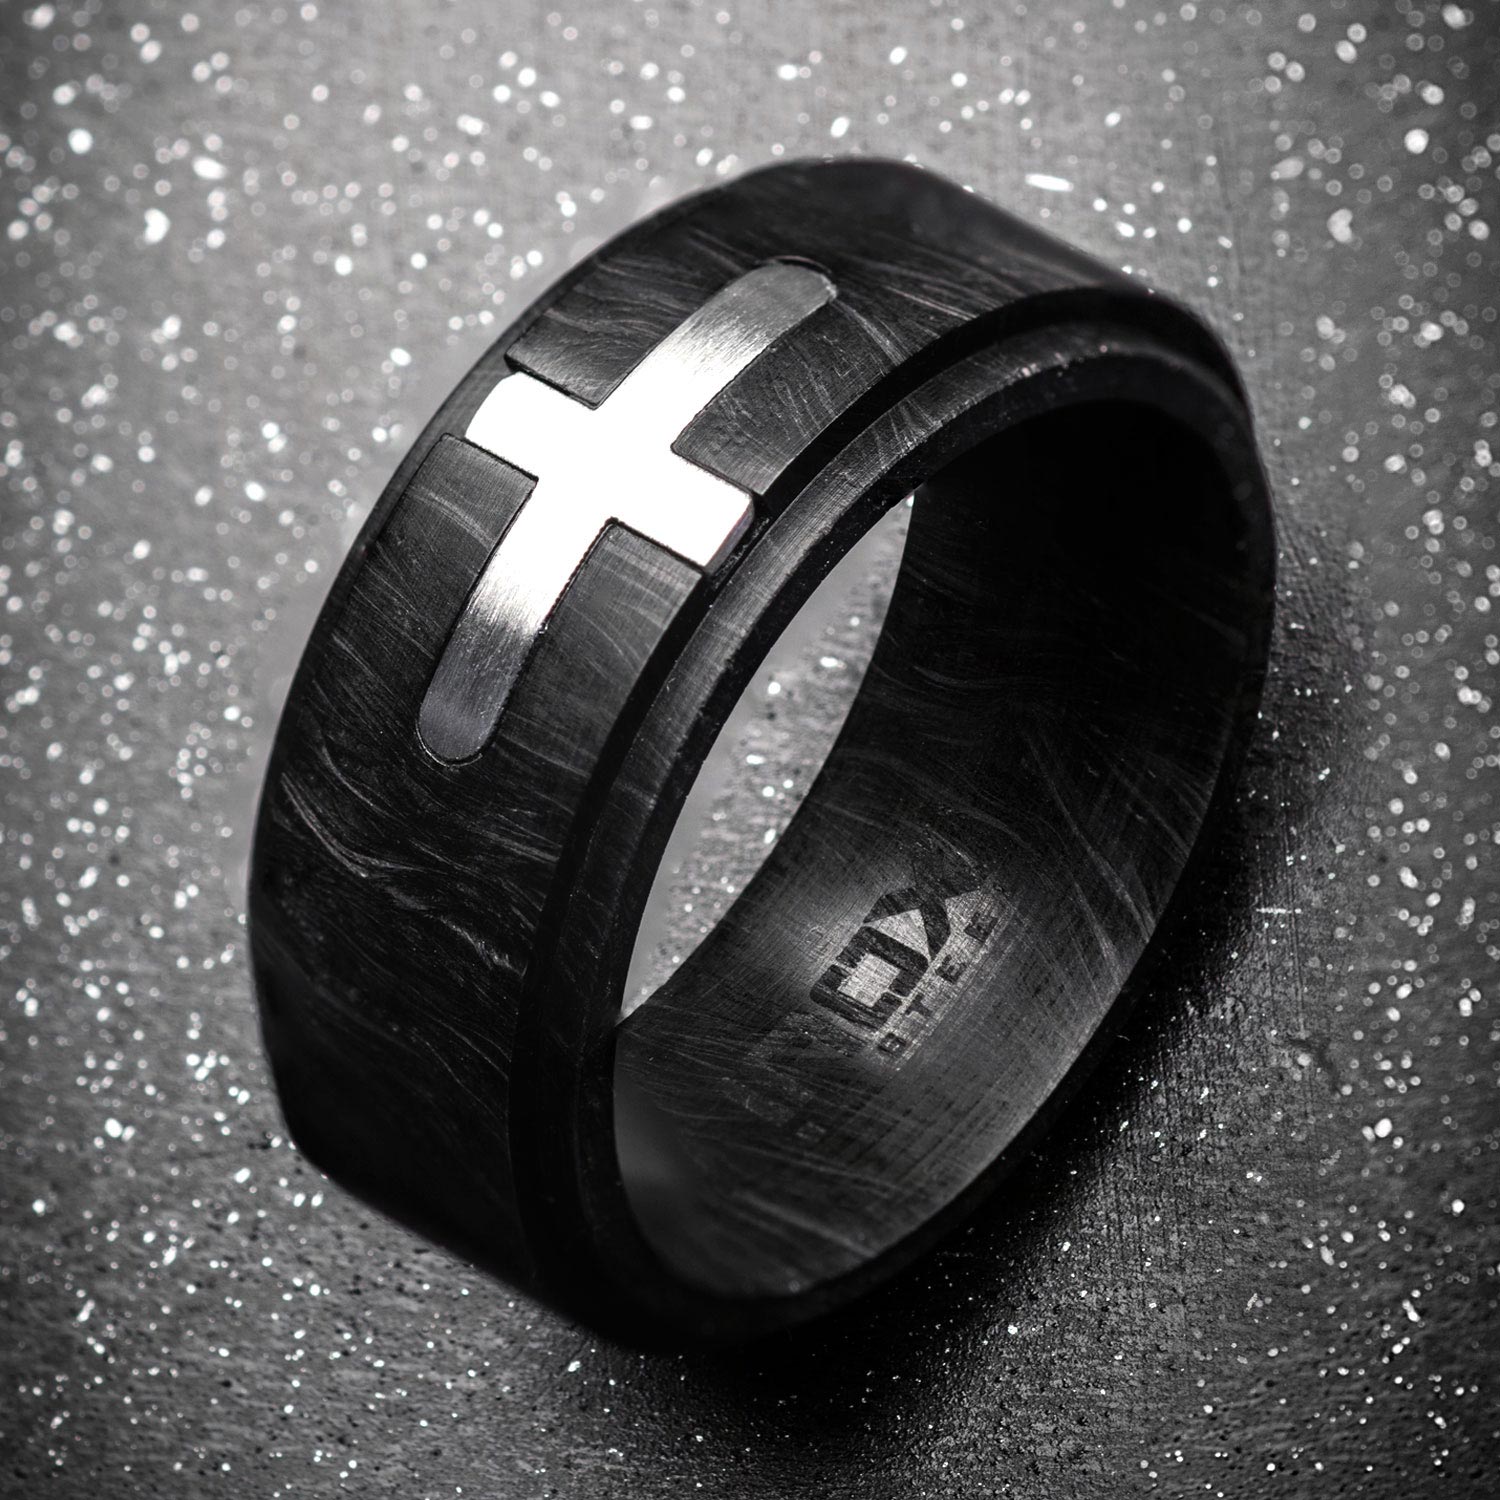 Stainless Steel Cross Inlayed in Solid Carbon Graphite Ring Image 4 Midtown Diamonds Reno, NV